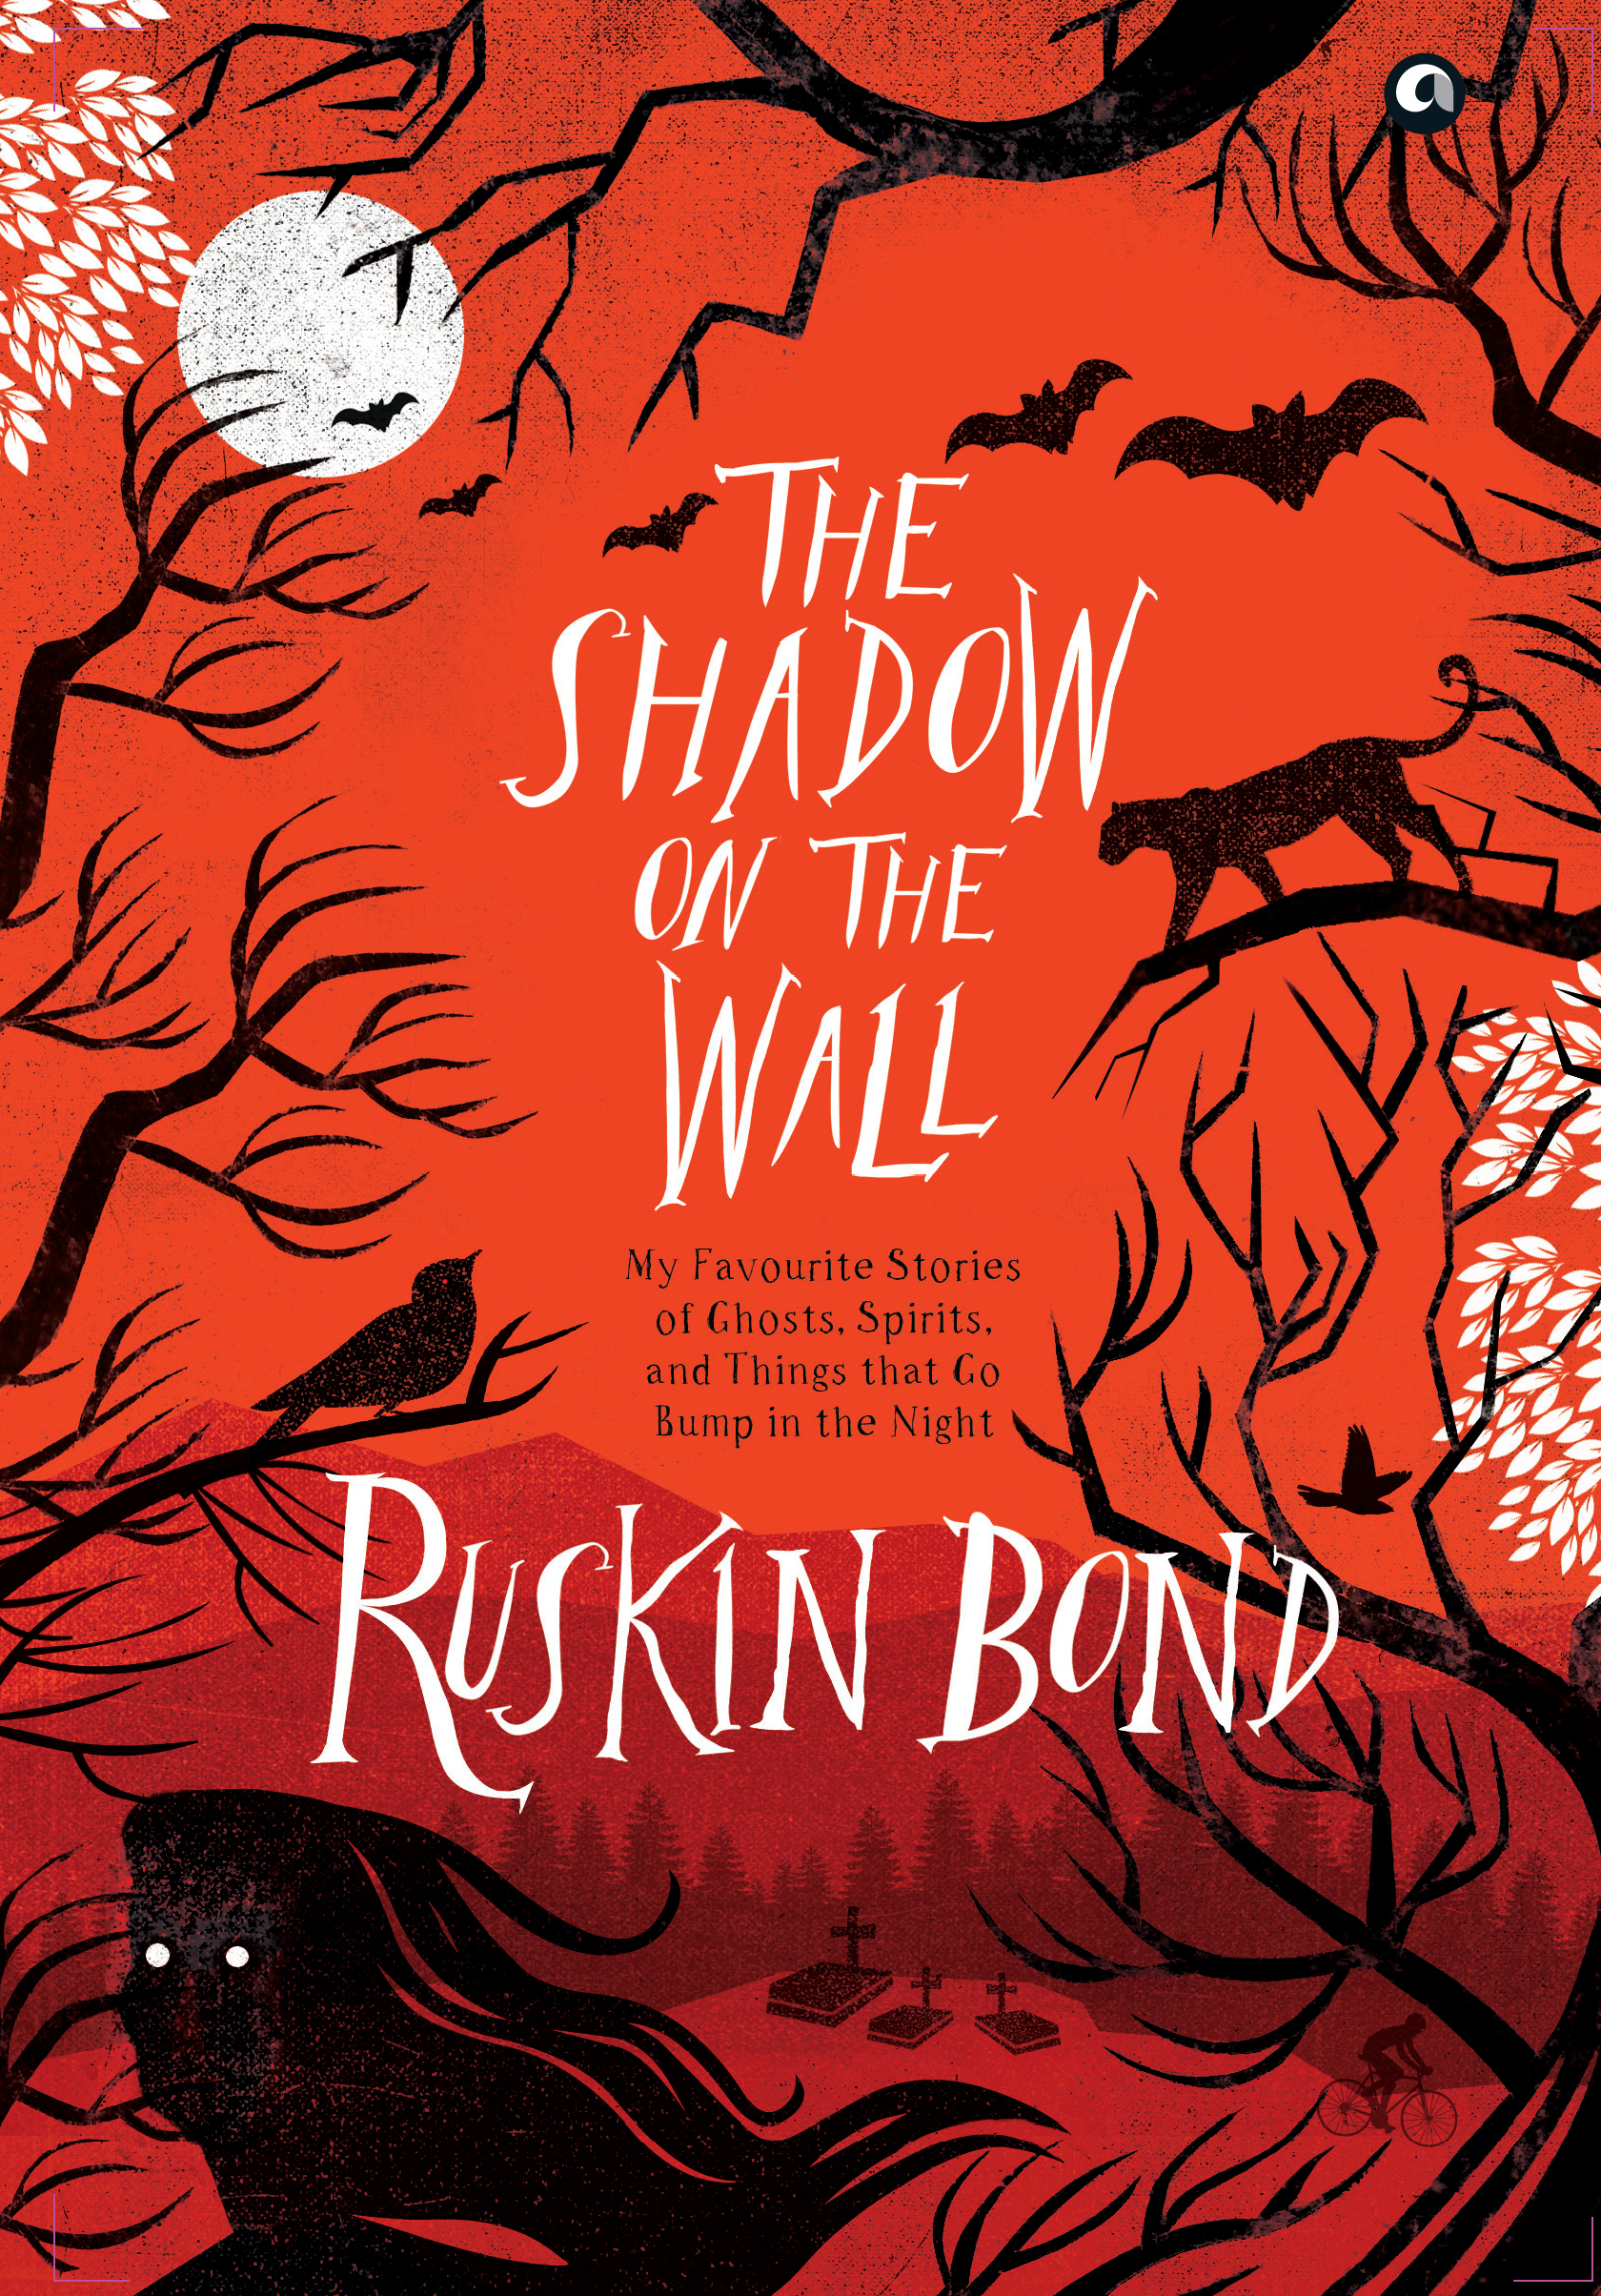 The Shadow on the Wall: My Favourite Stories of Ghosts, Spirits, and Things that Go Bump in the Night